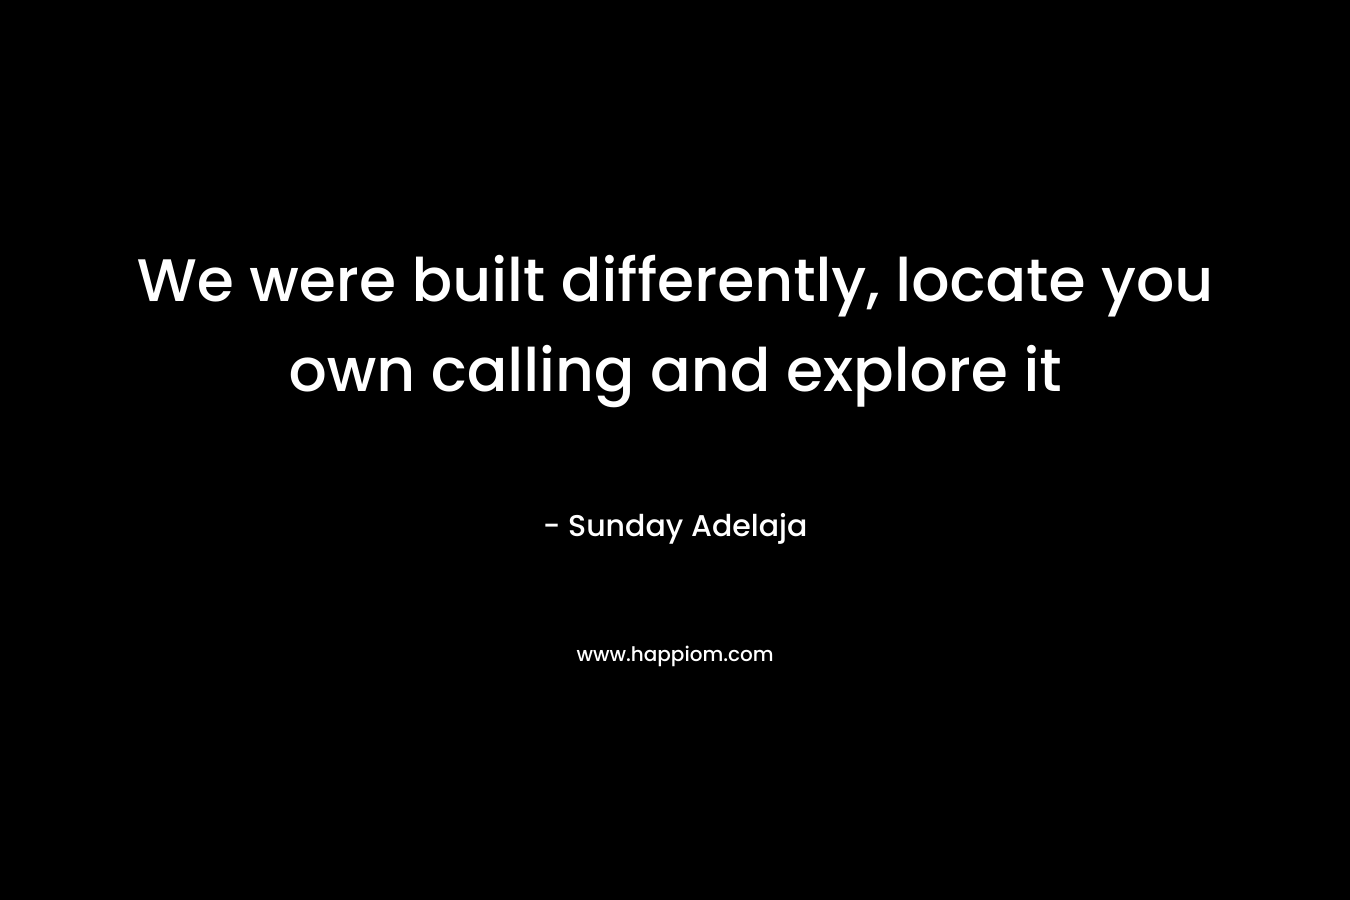 We were built differently, locate you own calling and explore it